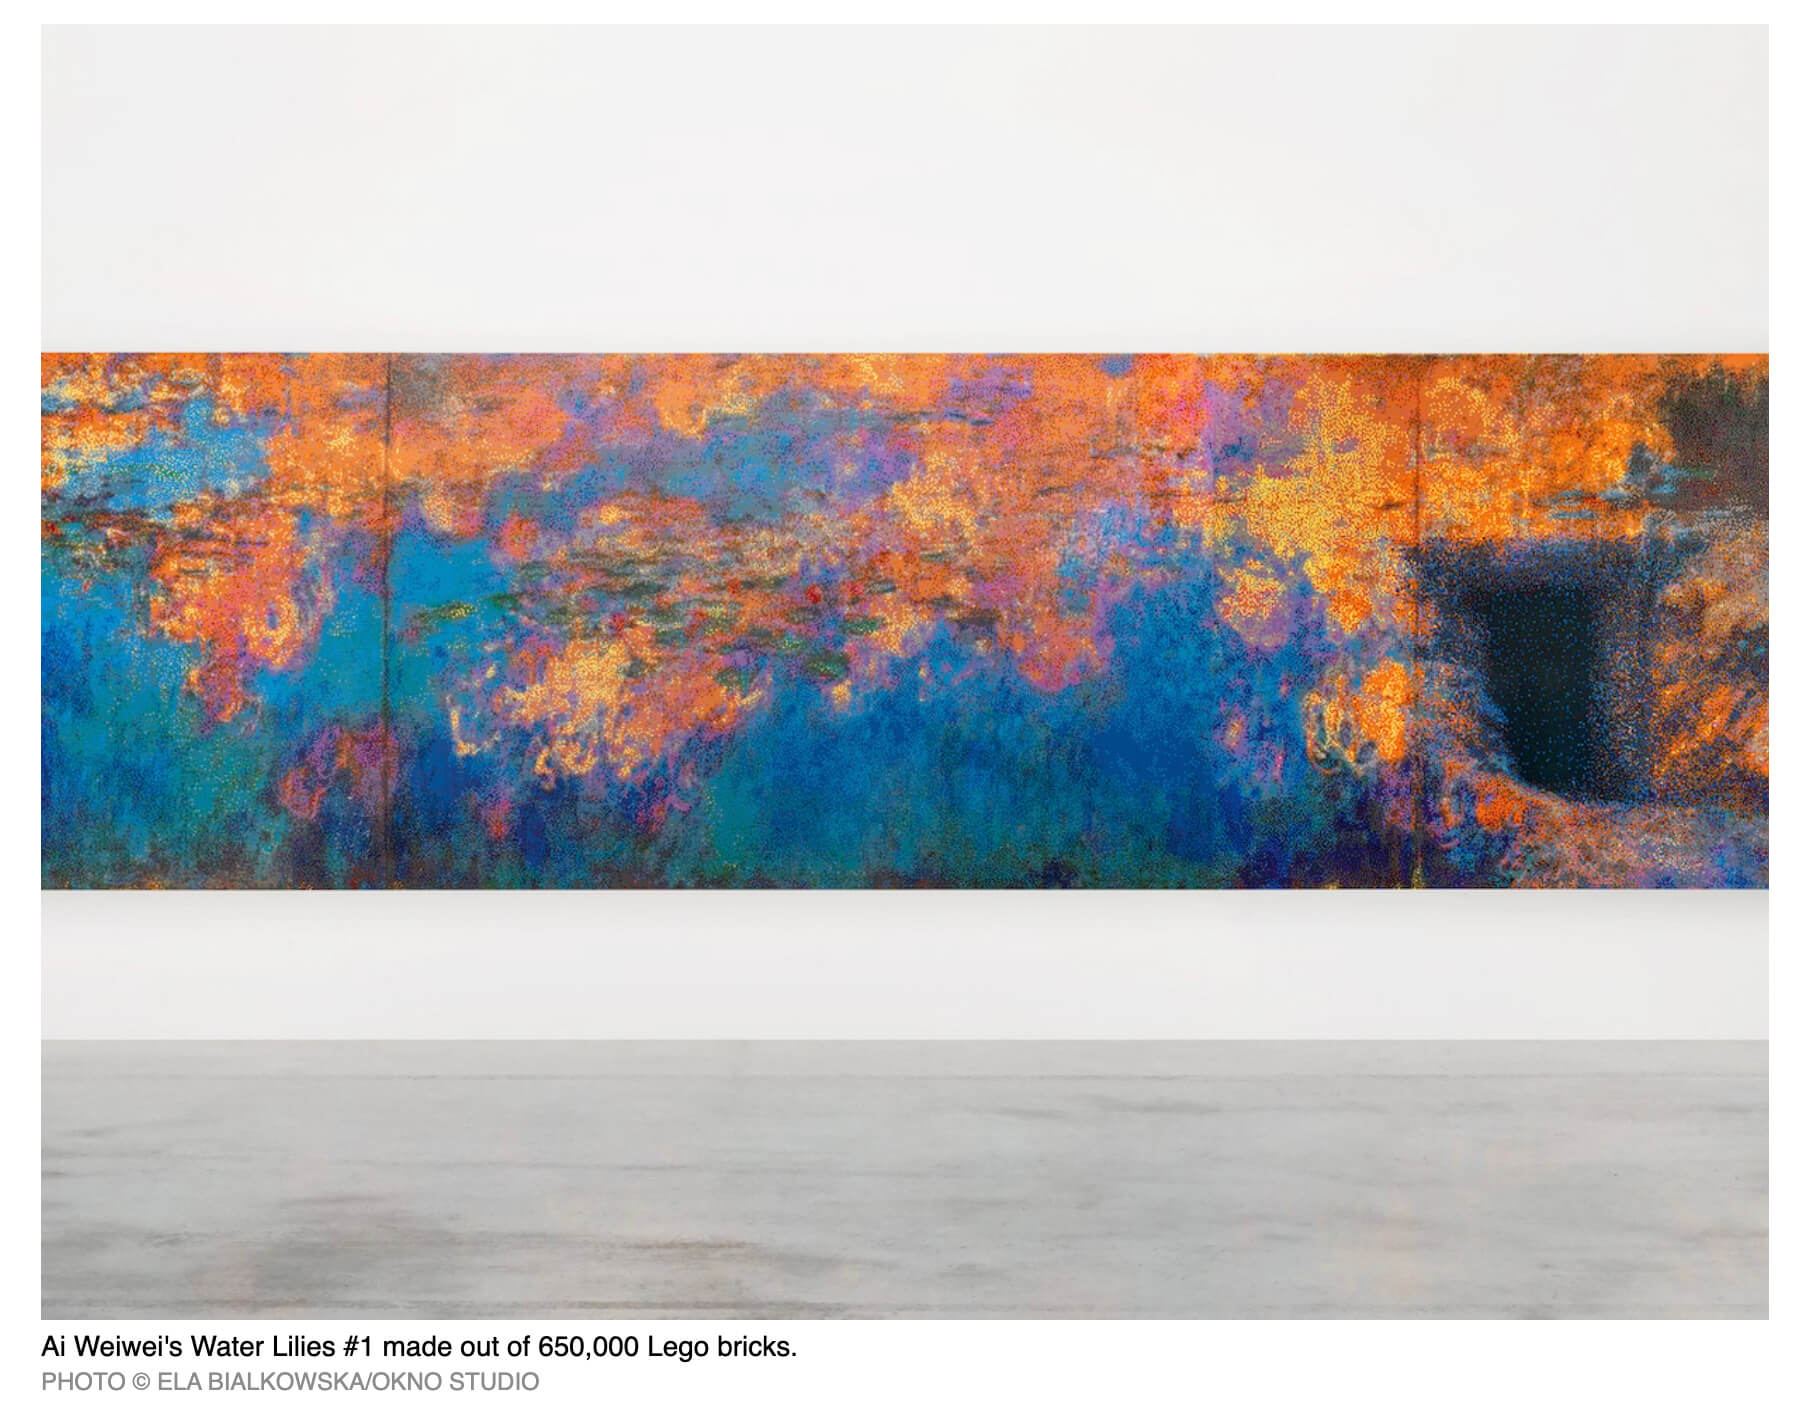 In 2023, Weiwei exhibited a 50-ft wide recreation mural of Claude Monet's Waterlillies made from 650,000 Lego bricks in 22 colors. As a Chinese contemporary artist, his work often portrays political dissent with common objects and found "ready-made" objects. Weiwei has used Lego bricks in his artistic practice since 2014.